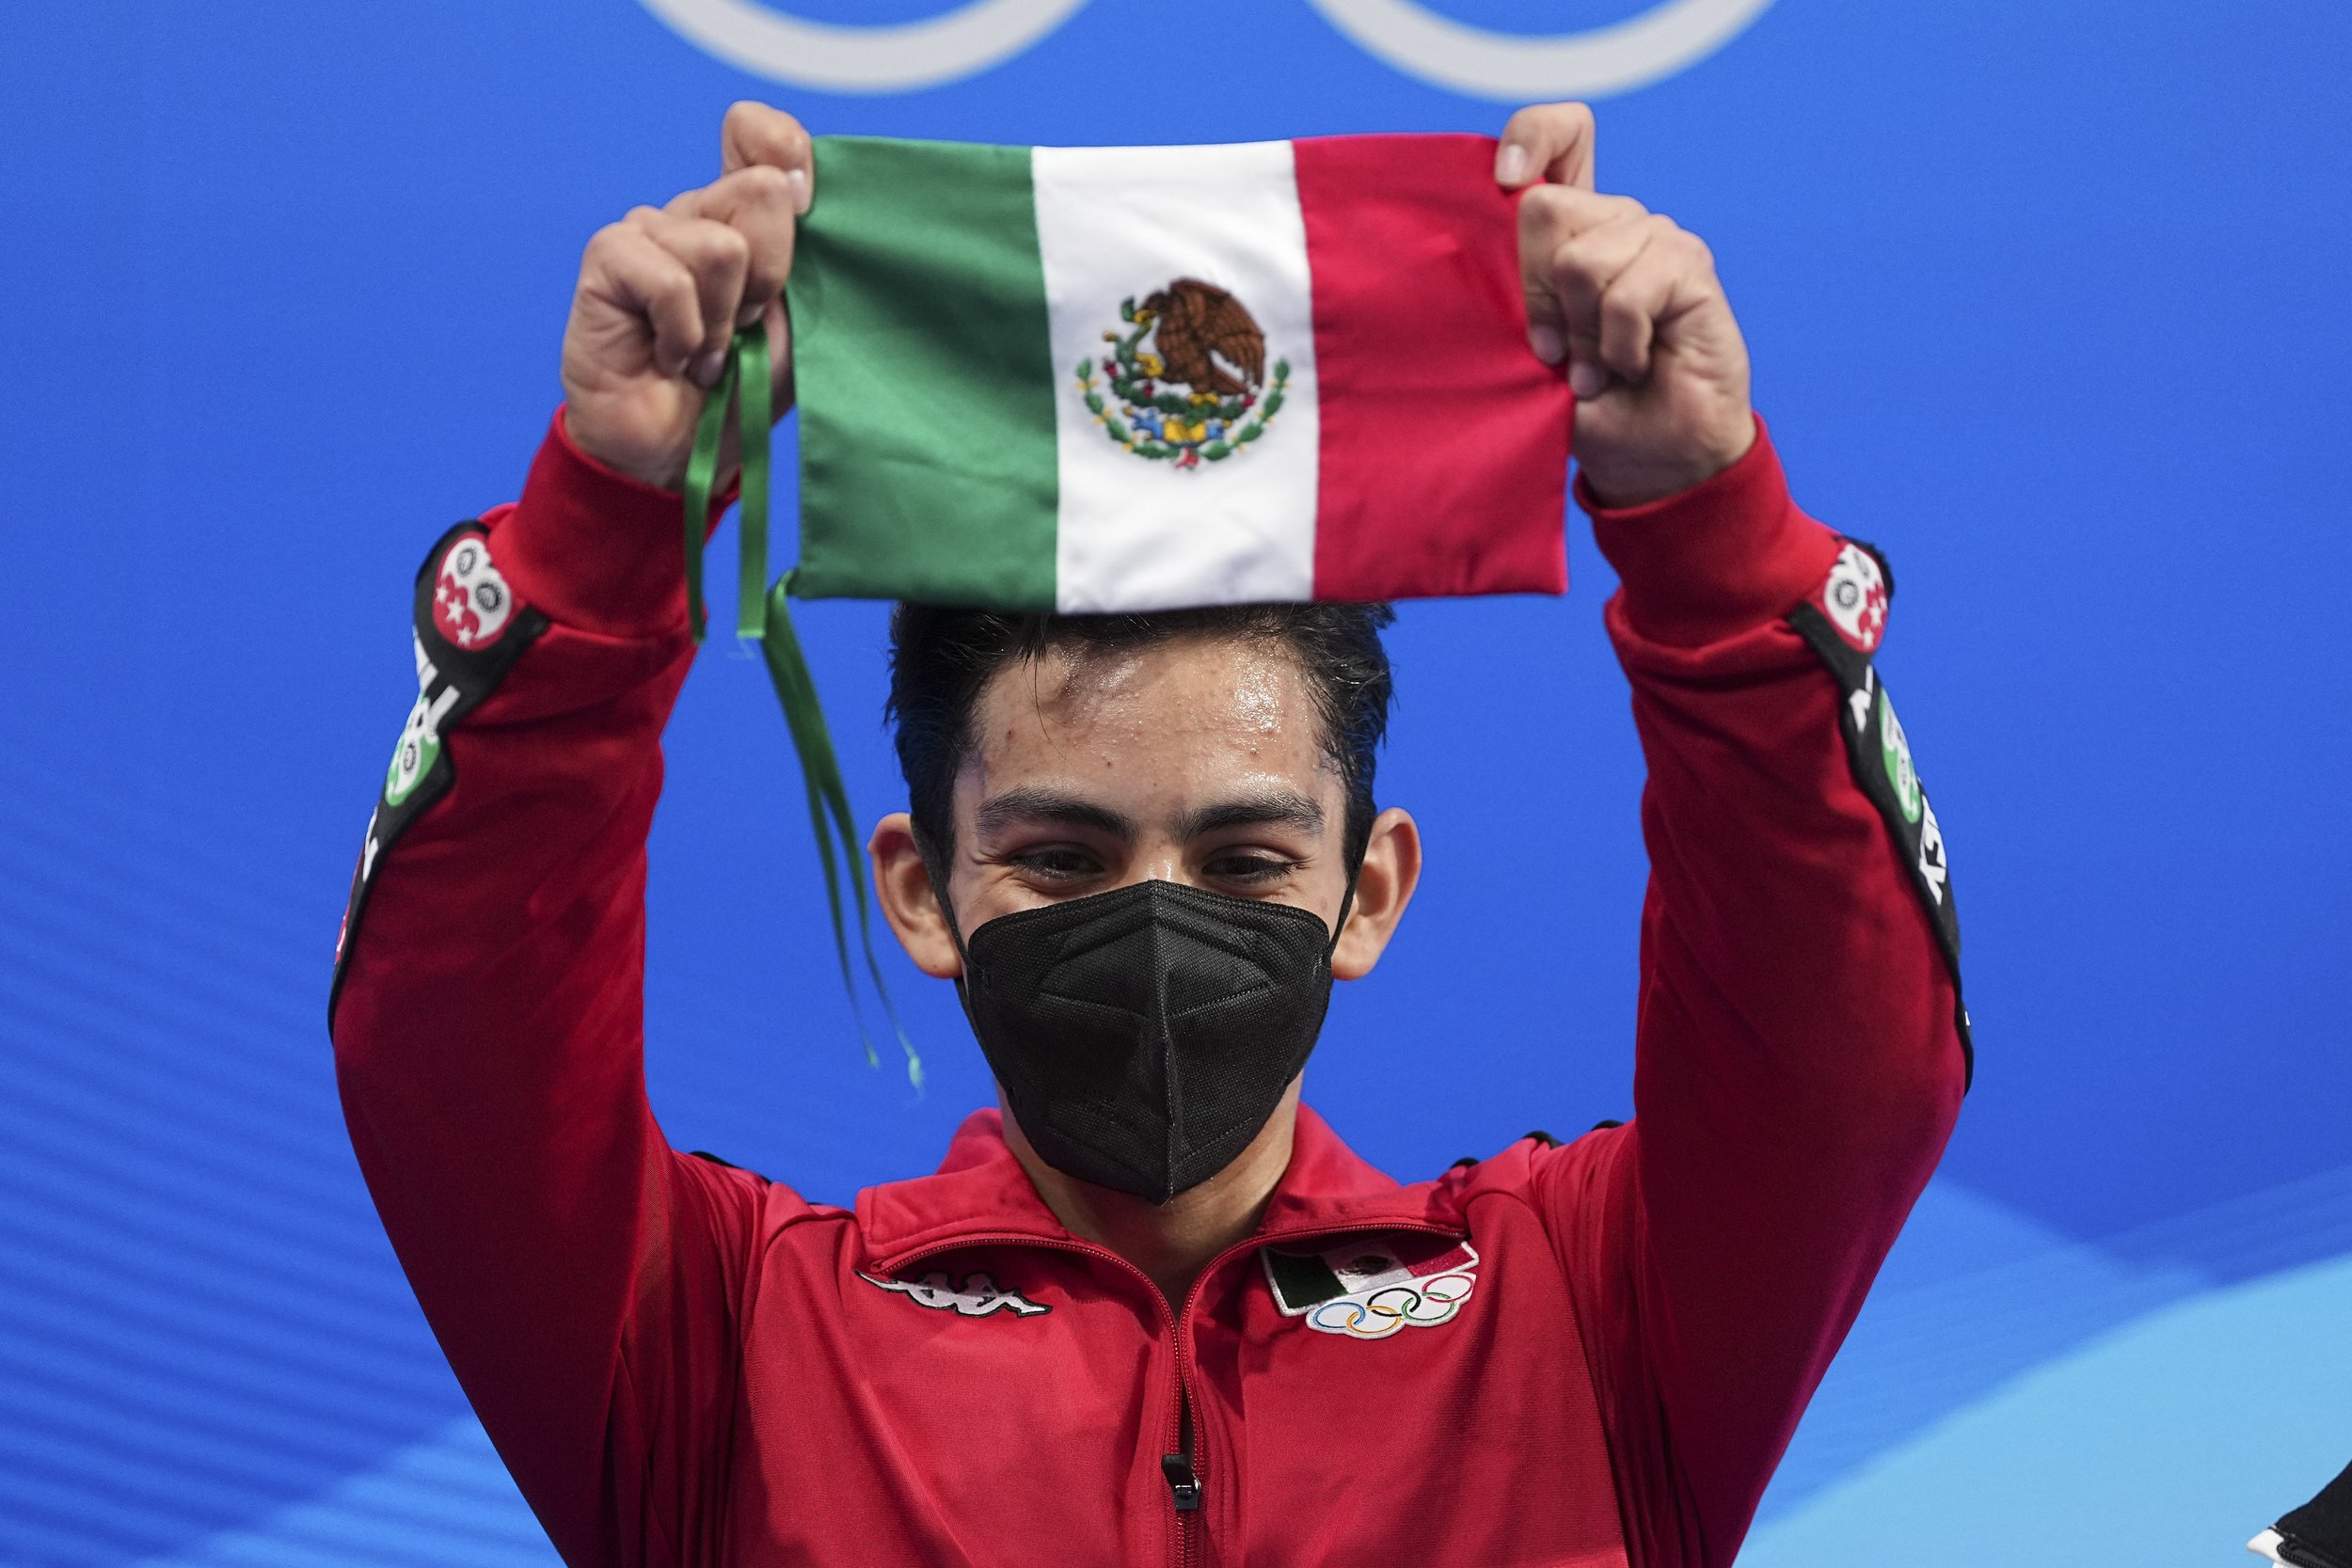  Donovan Carrillo, of Mexico, gestures after competing in the men's free skate program during the figure skating event at the 2022 Winter Olympics, Thursday, Feb. 10, 2022, in Beijing. (AP Photo/David J. Phillip) 